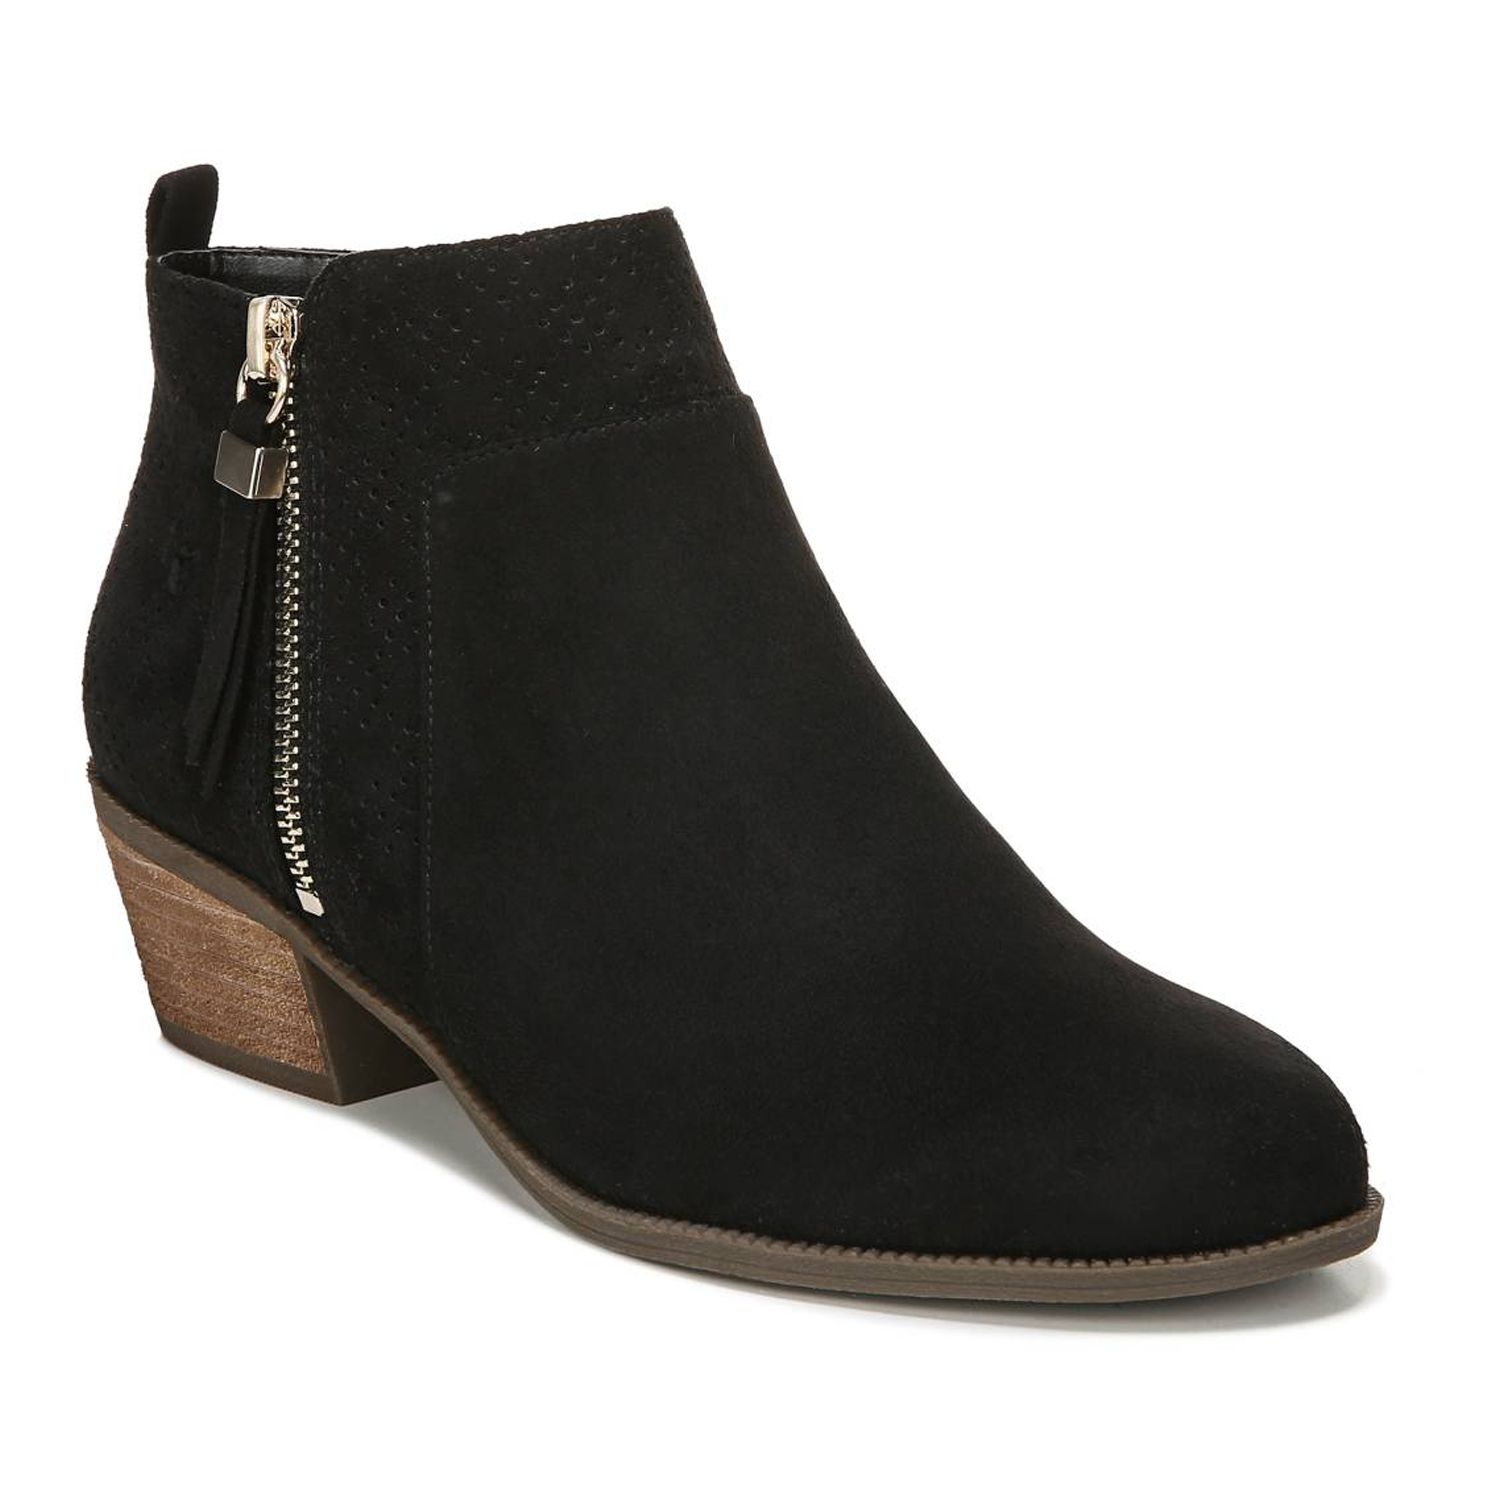 Image for Dr. Scholl's Brianna Women's Ankle Boots at Kohl's.